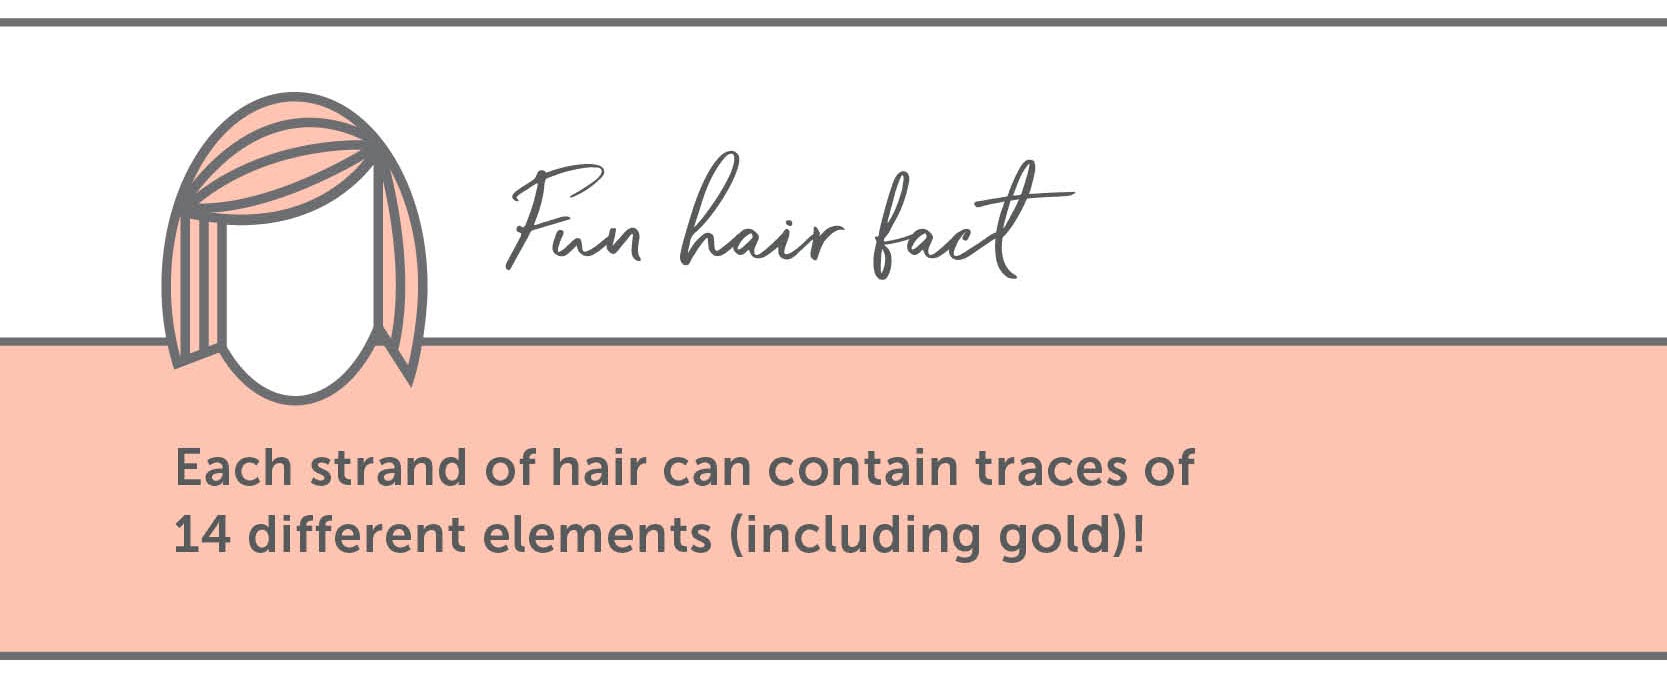 Hair Facts: Each strand of hair can contain traces of 14 different elements (including gold)!